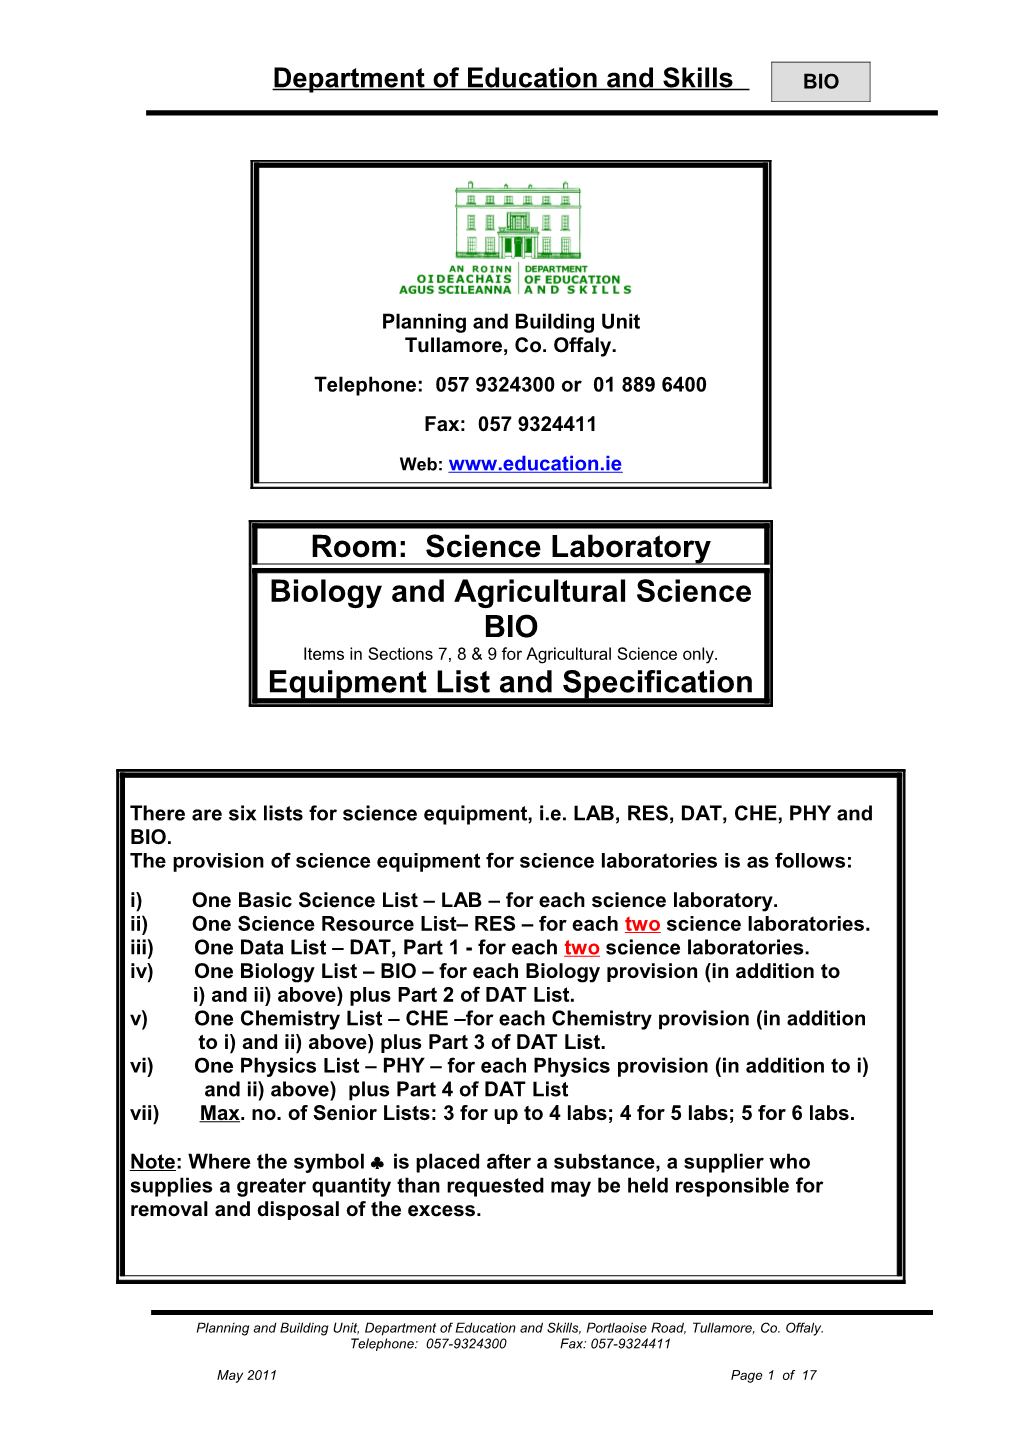 Room: Science Laboratory - Biology and Agricultural Science - B10 - Equipment List &